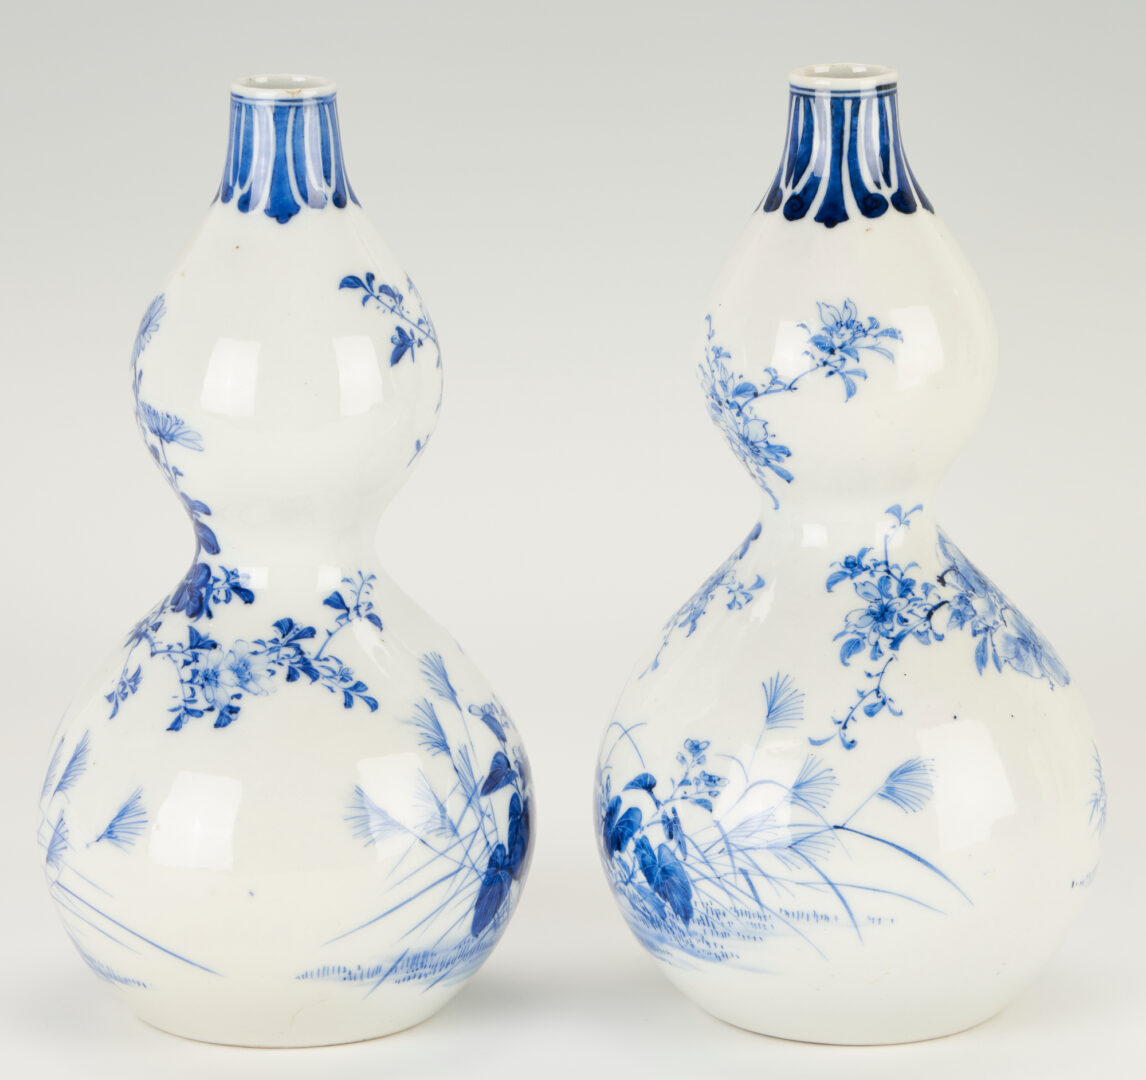 Lot 404: 6 Asian Porcelain Items, incl. Double Gourd Vases and Chinese Export